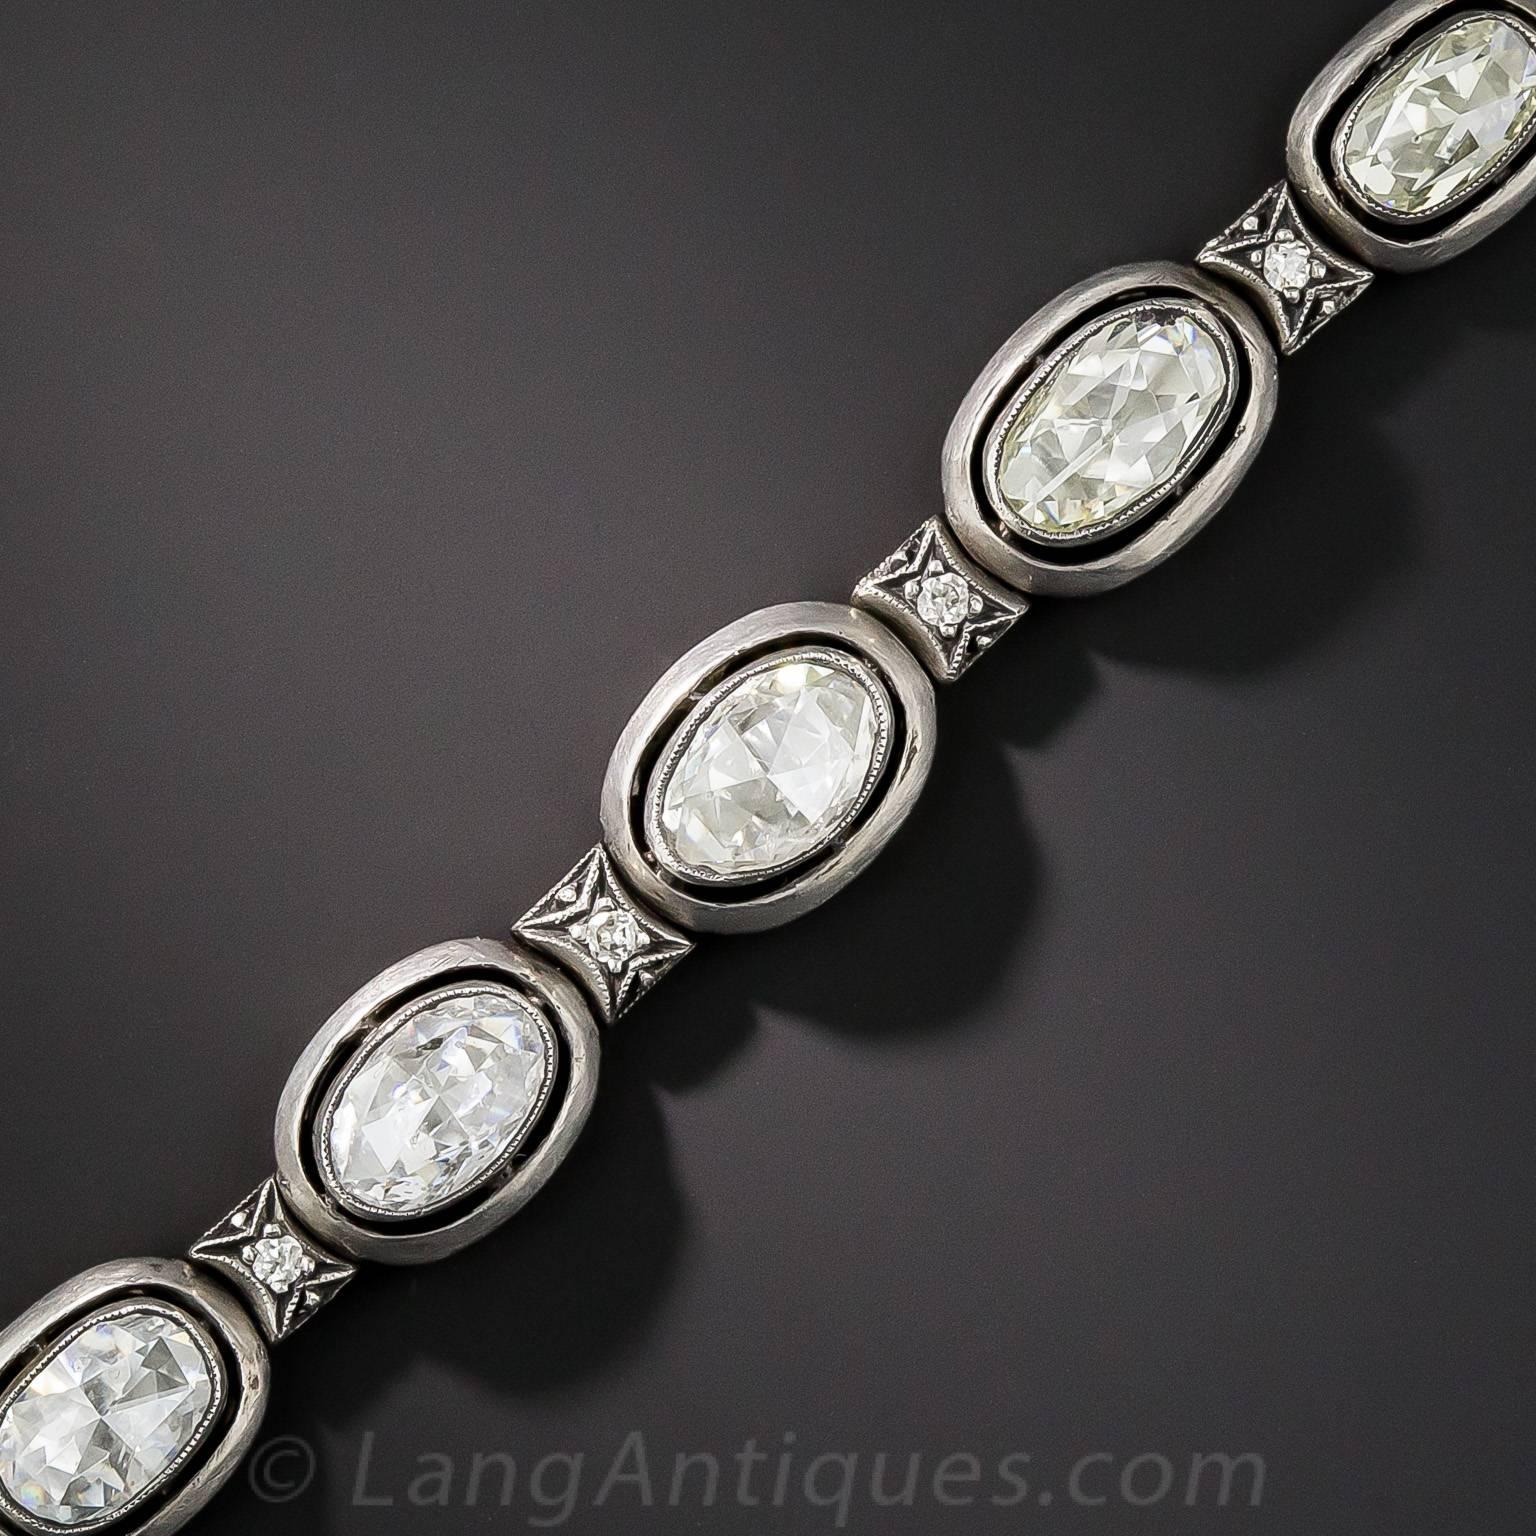 This fabulous bracelet, composed of 12 oval rose-cut diamonds, totaling 10 carats, hails from early twentieth century (1908-1927) Russia. The dozen sparkling white stones are each collet-set in silver and float inside rounded silver frames supported